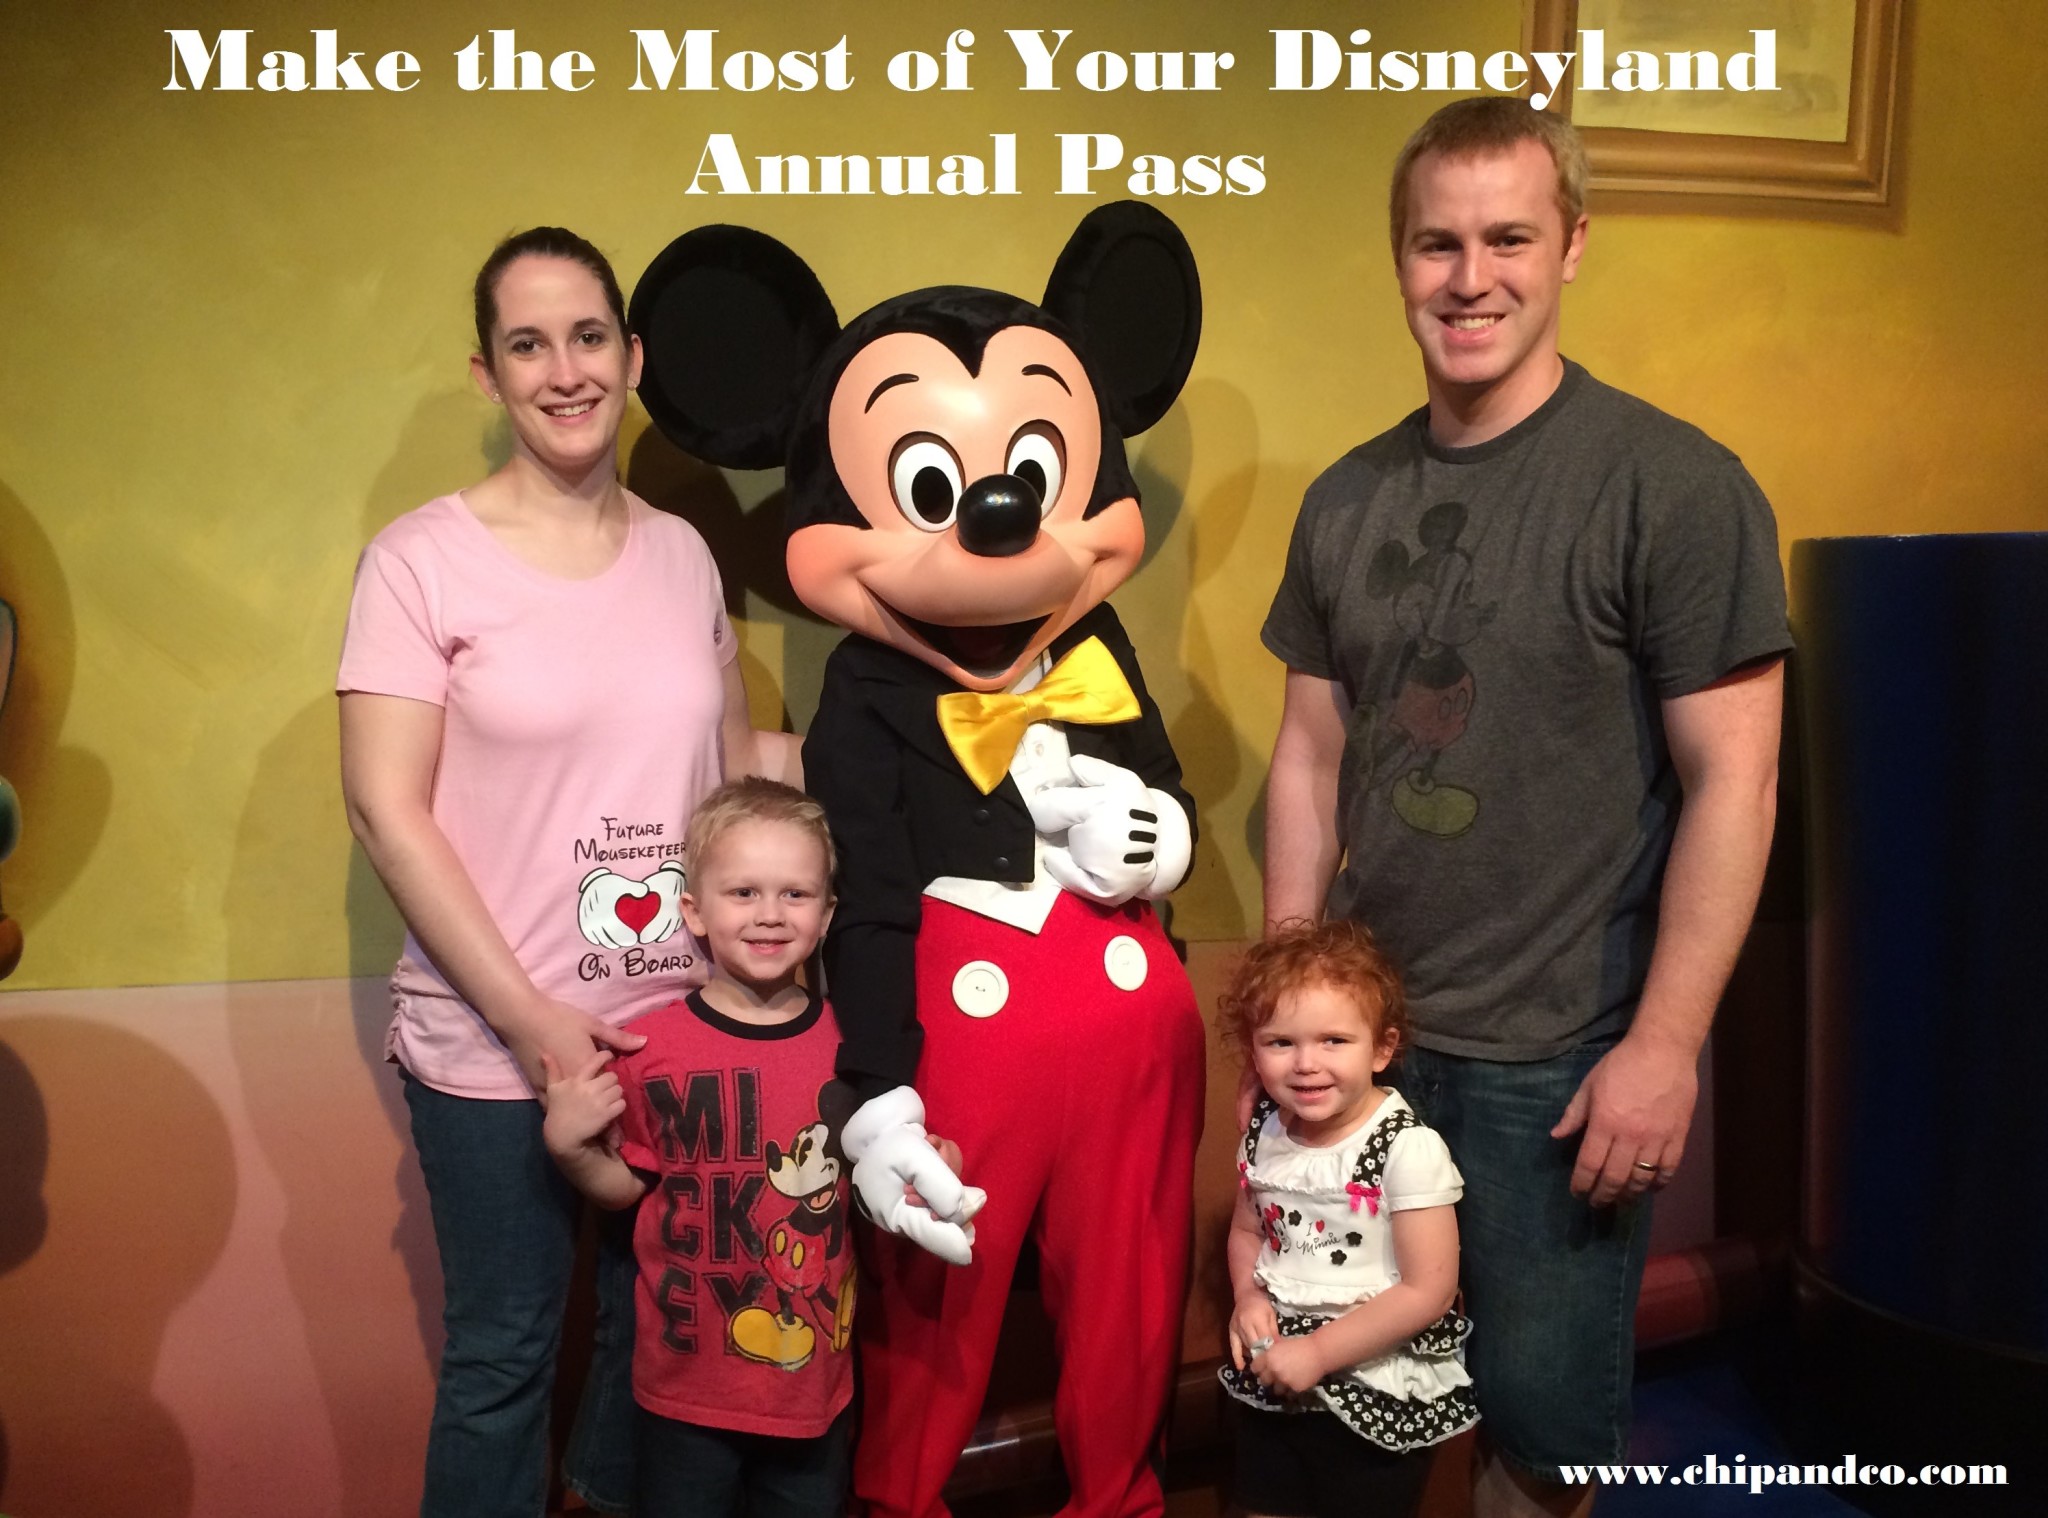 Ways to Make the Most of Your Disneyland Annual Pass